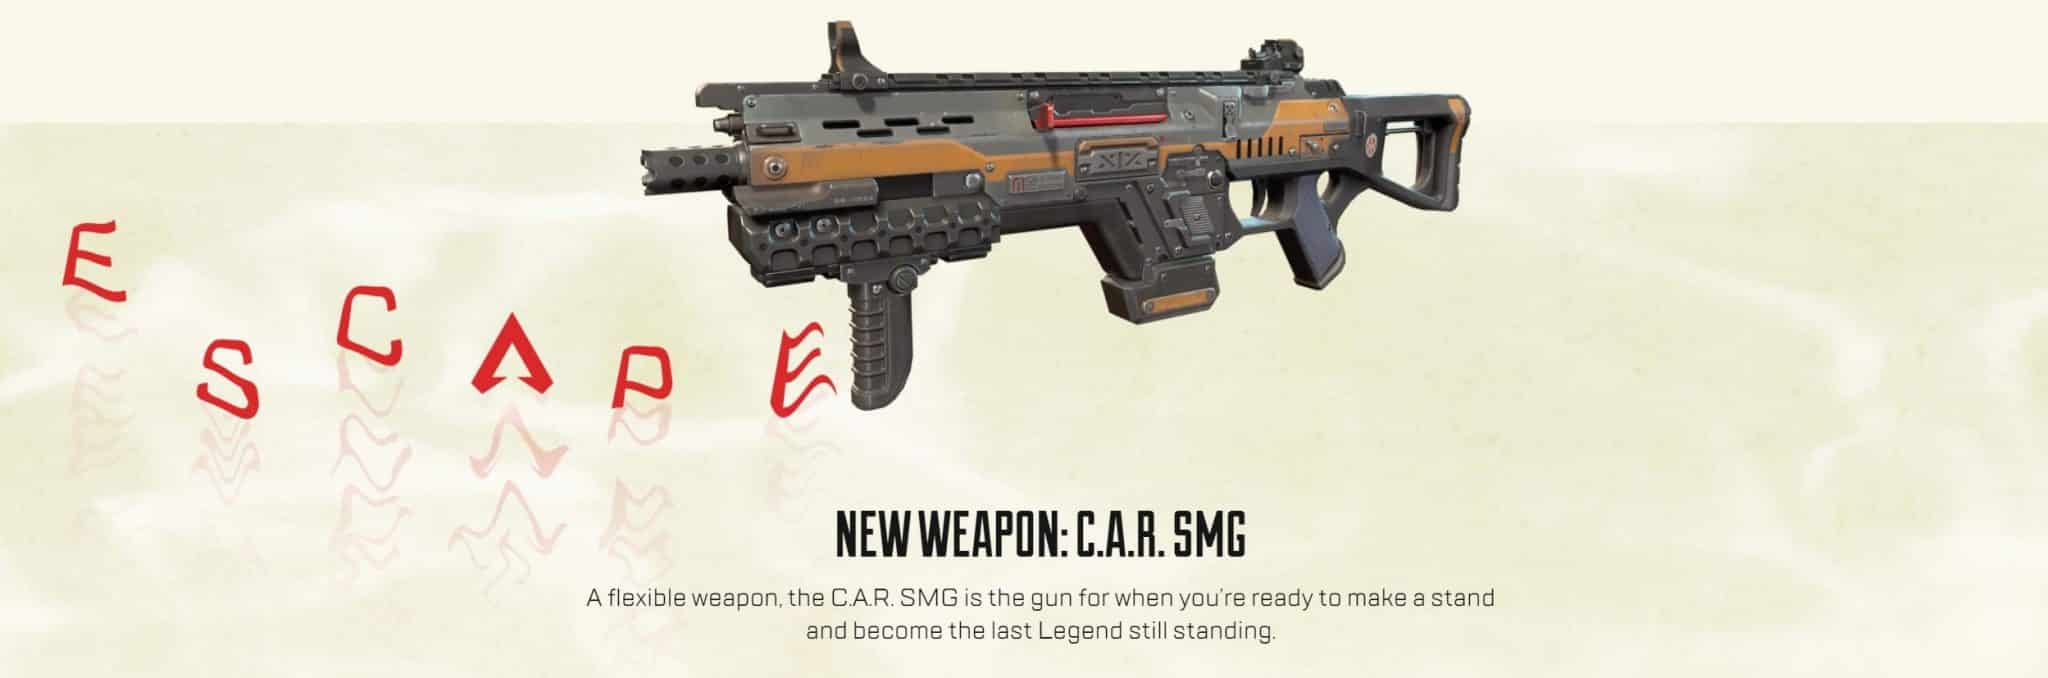 CAR SMG details from Apex Legends